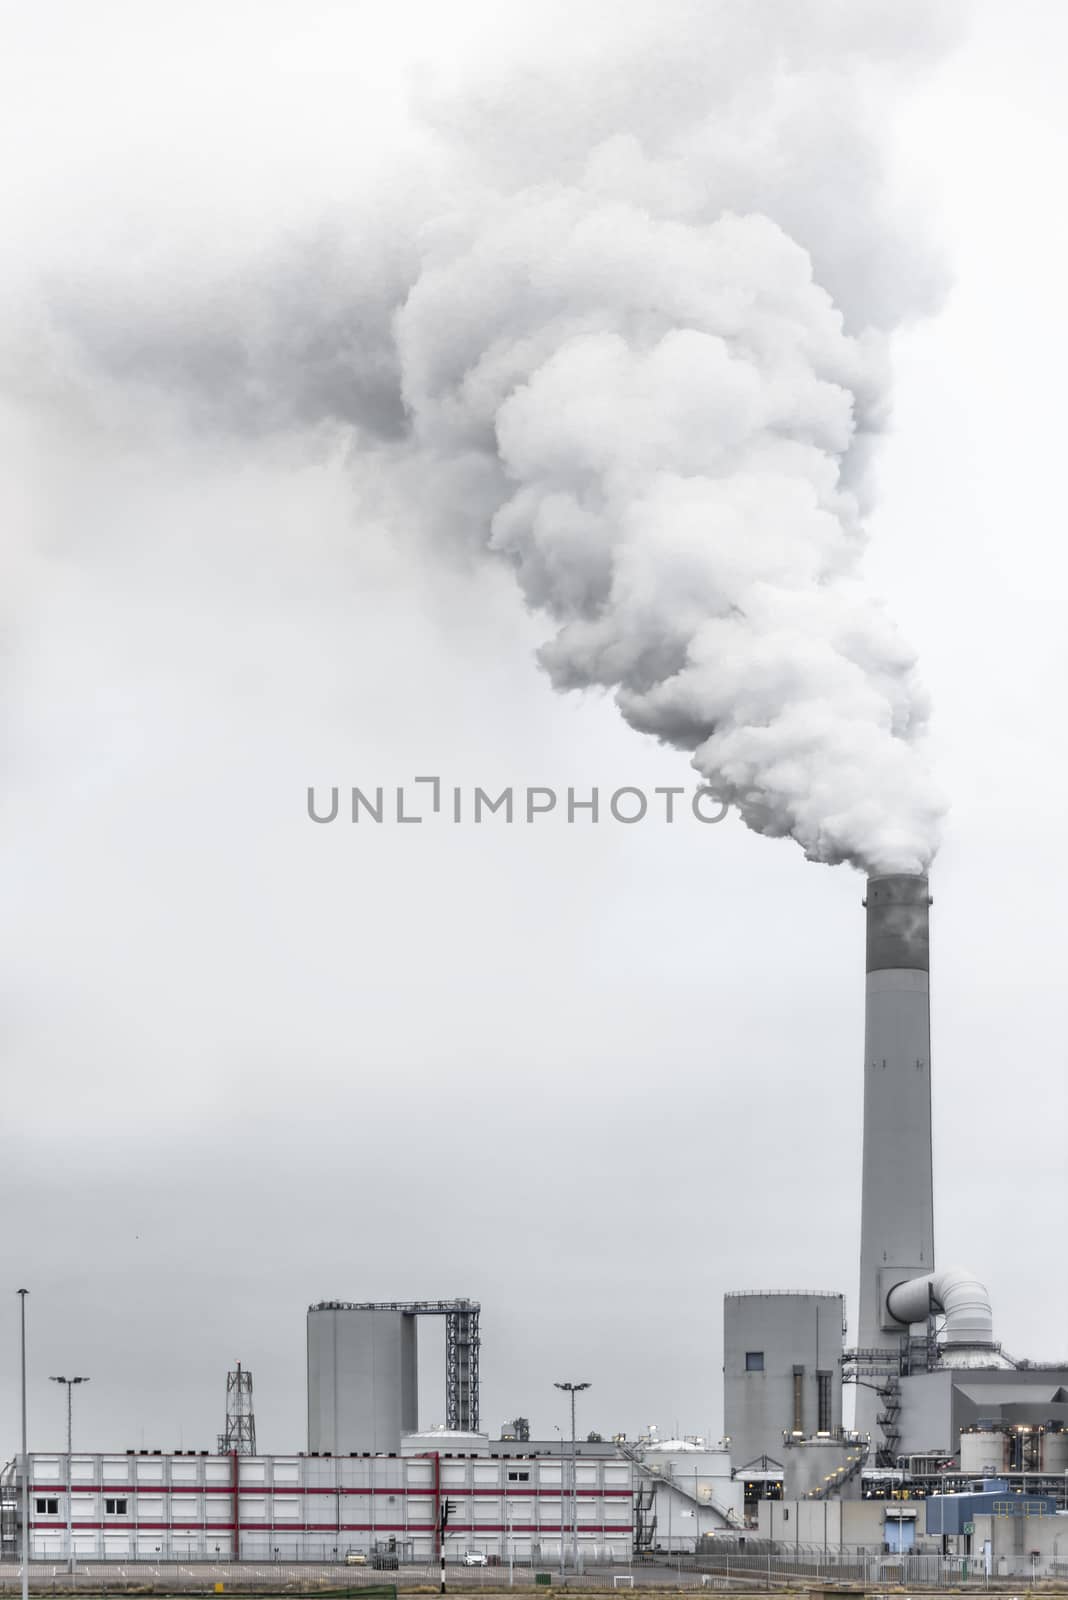 Tall chimney exhausting or pulling a huge quantity of smoke, mist or pollution, Rotterdam, Netherlands by ankorlight